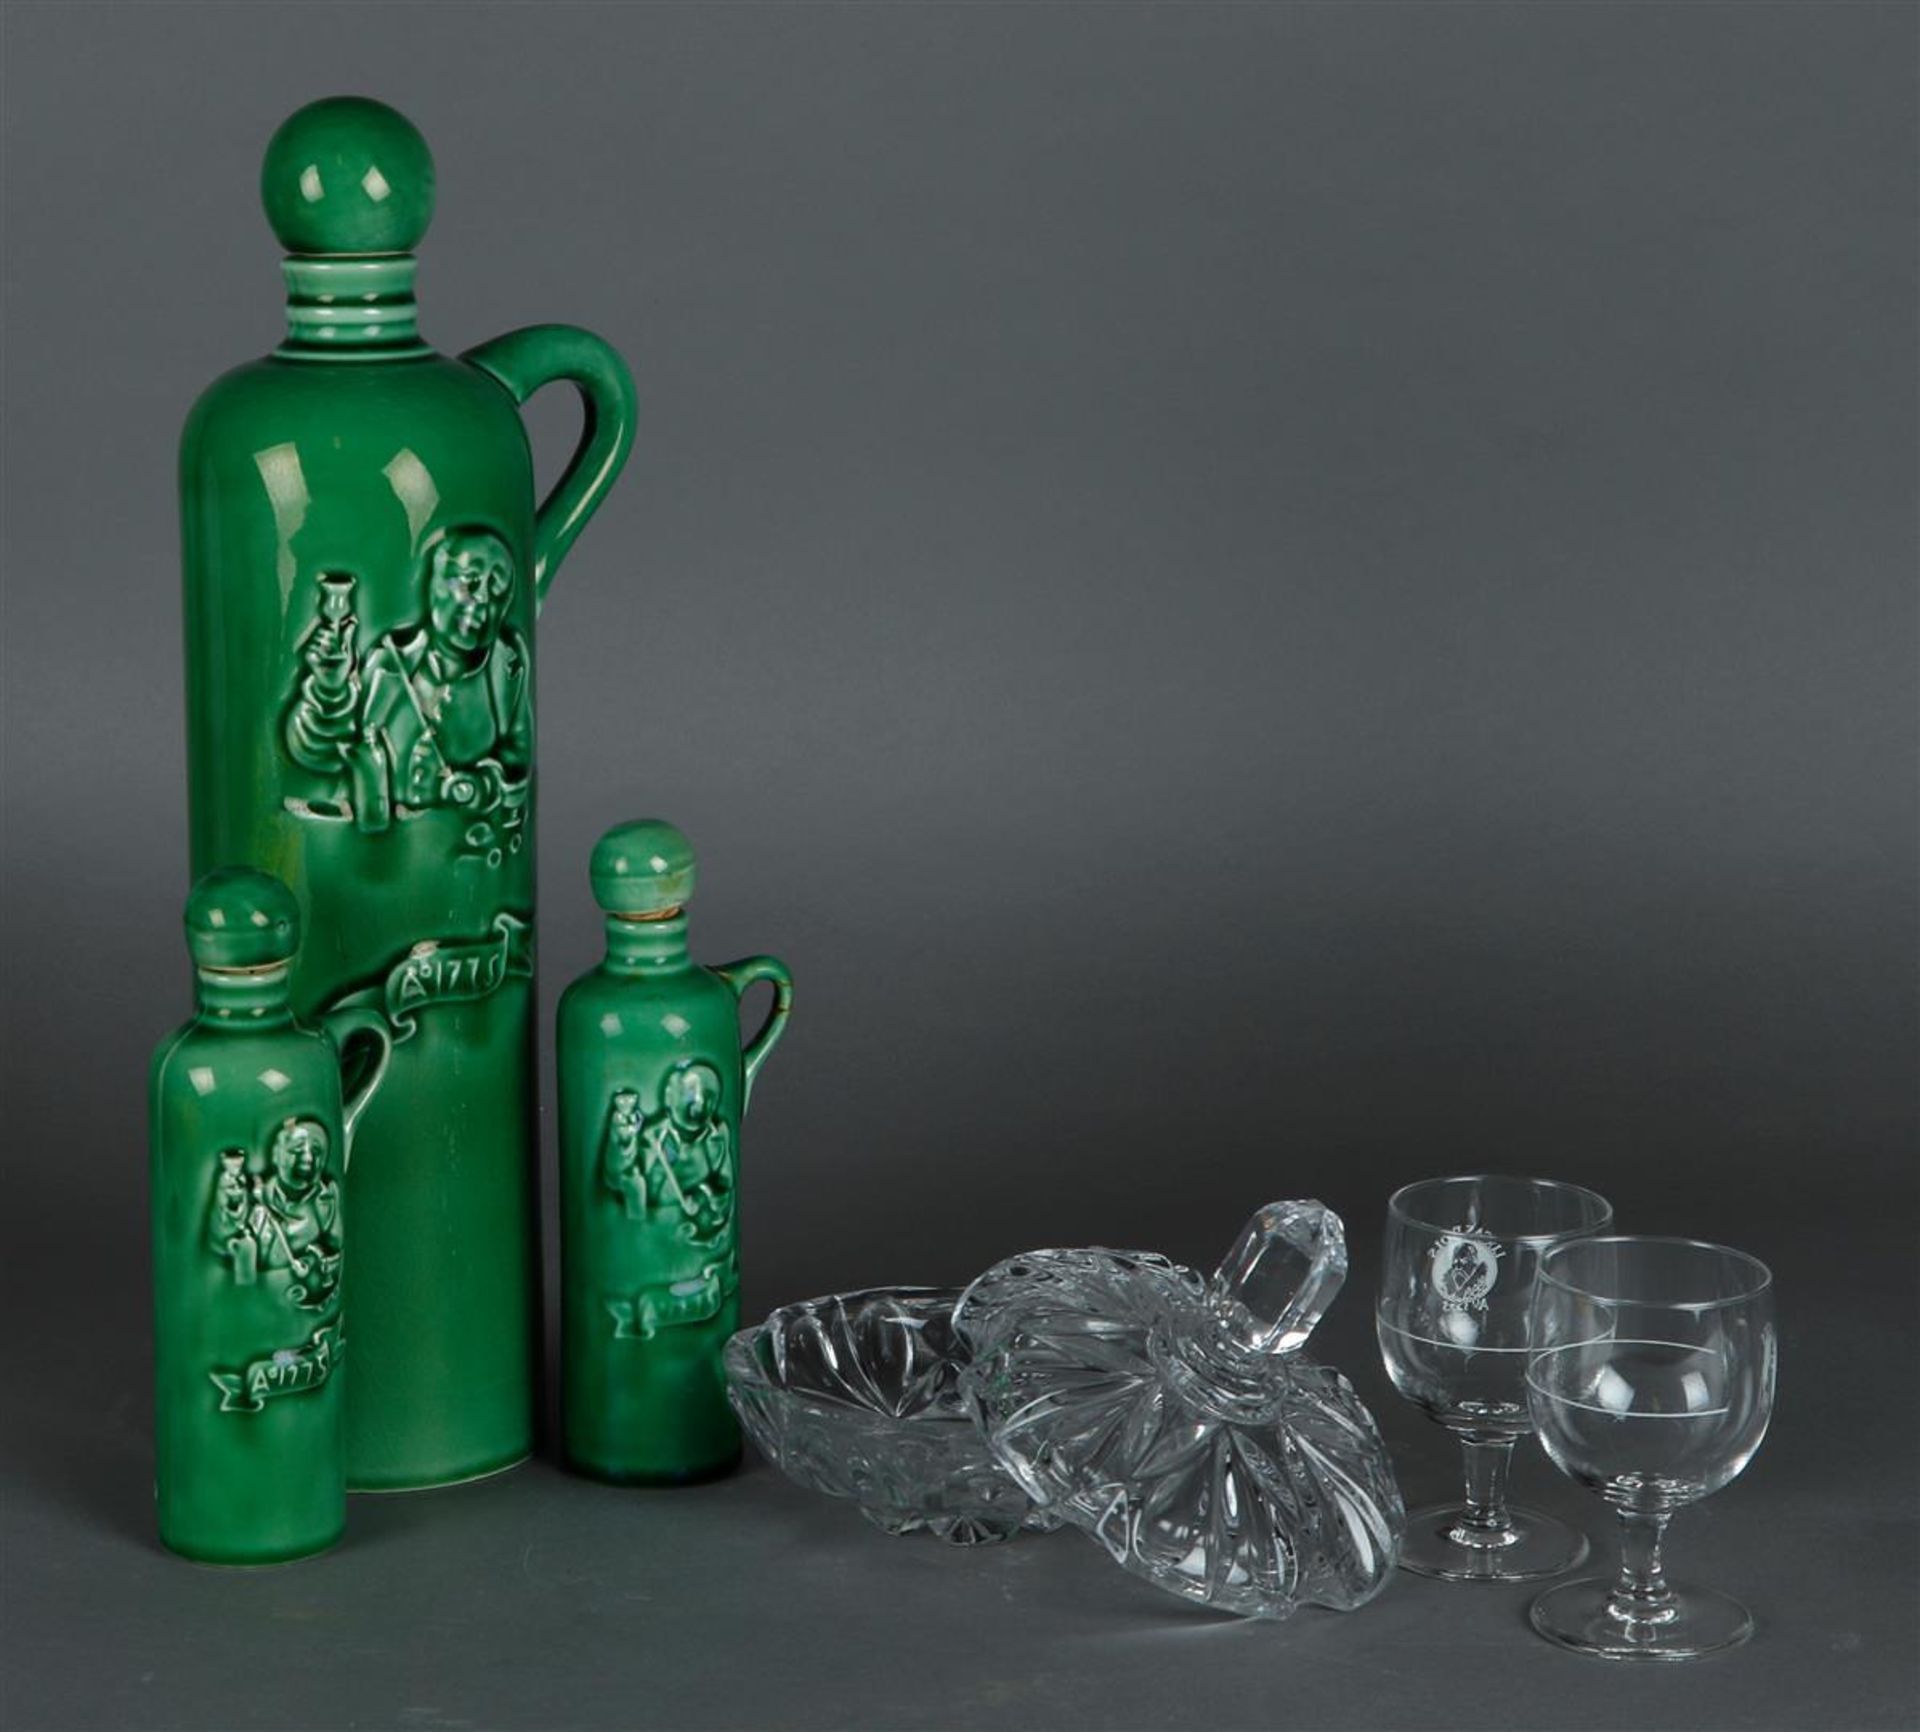 A Lucas Bols liqueur set consisting of (3) earthenware bottles and (2) glasses. In addition, a press